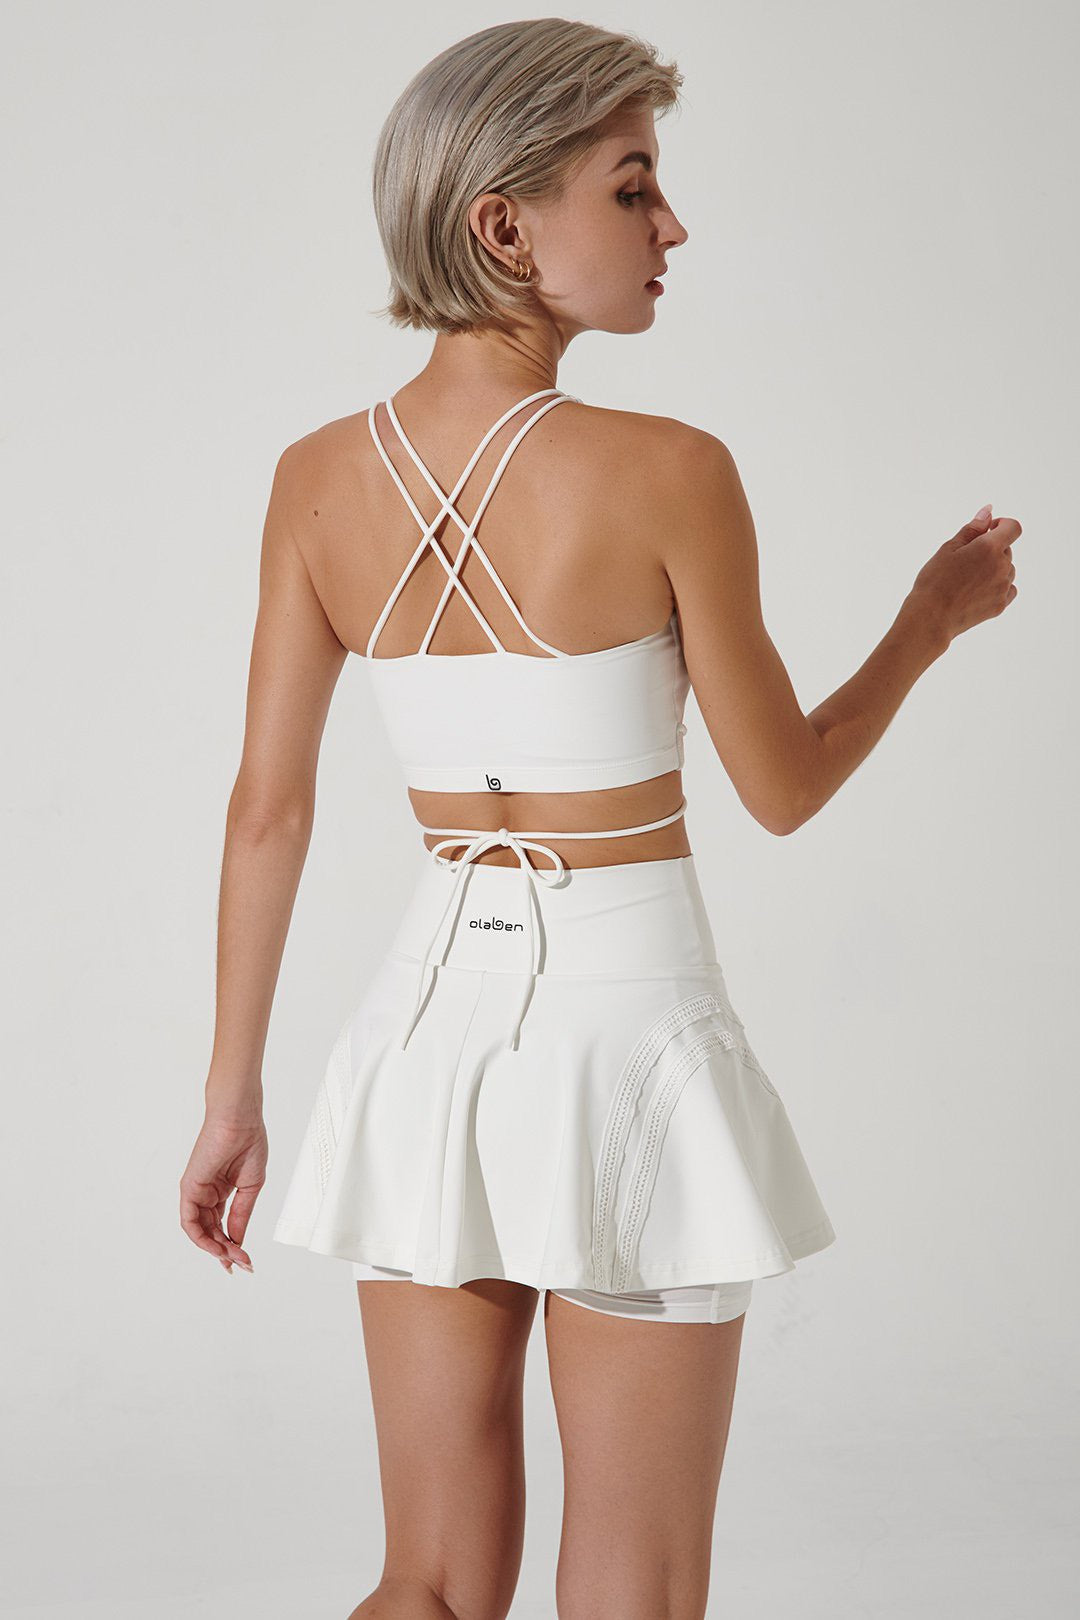 White women's tank top by Elinor Tank - stylish and versatile summer essential.